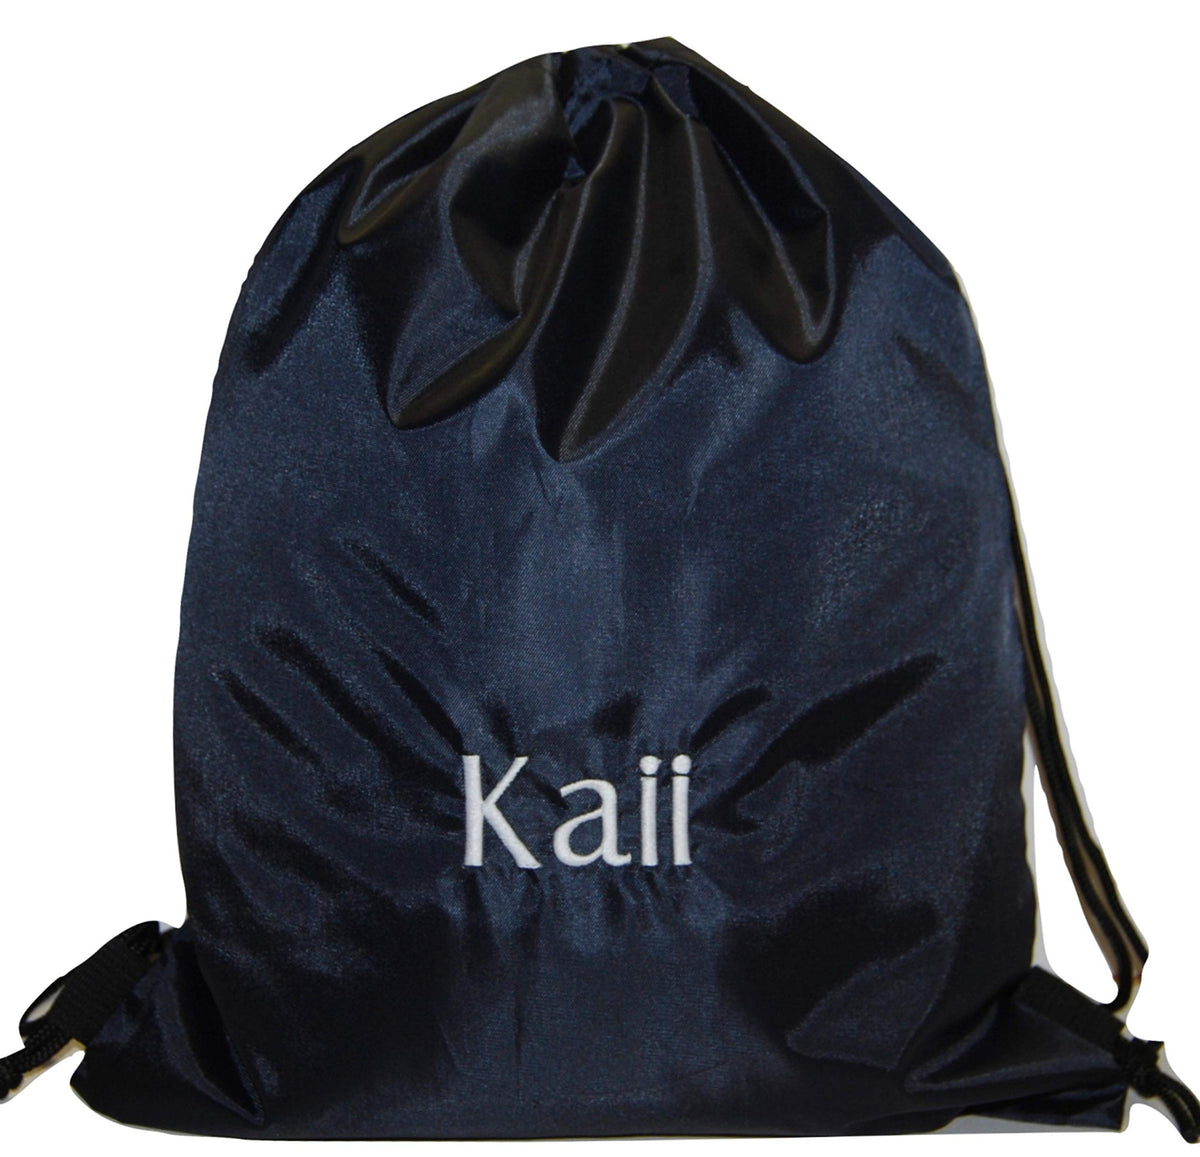 Personalised Drawstring Bag PE Sports Games School Embroidered Name (Navy Blue)